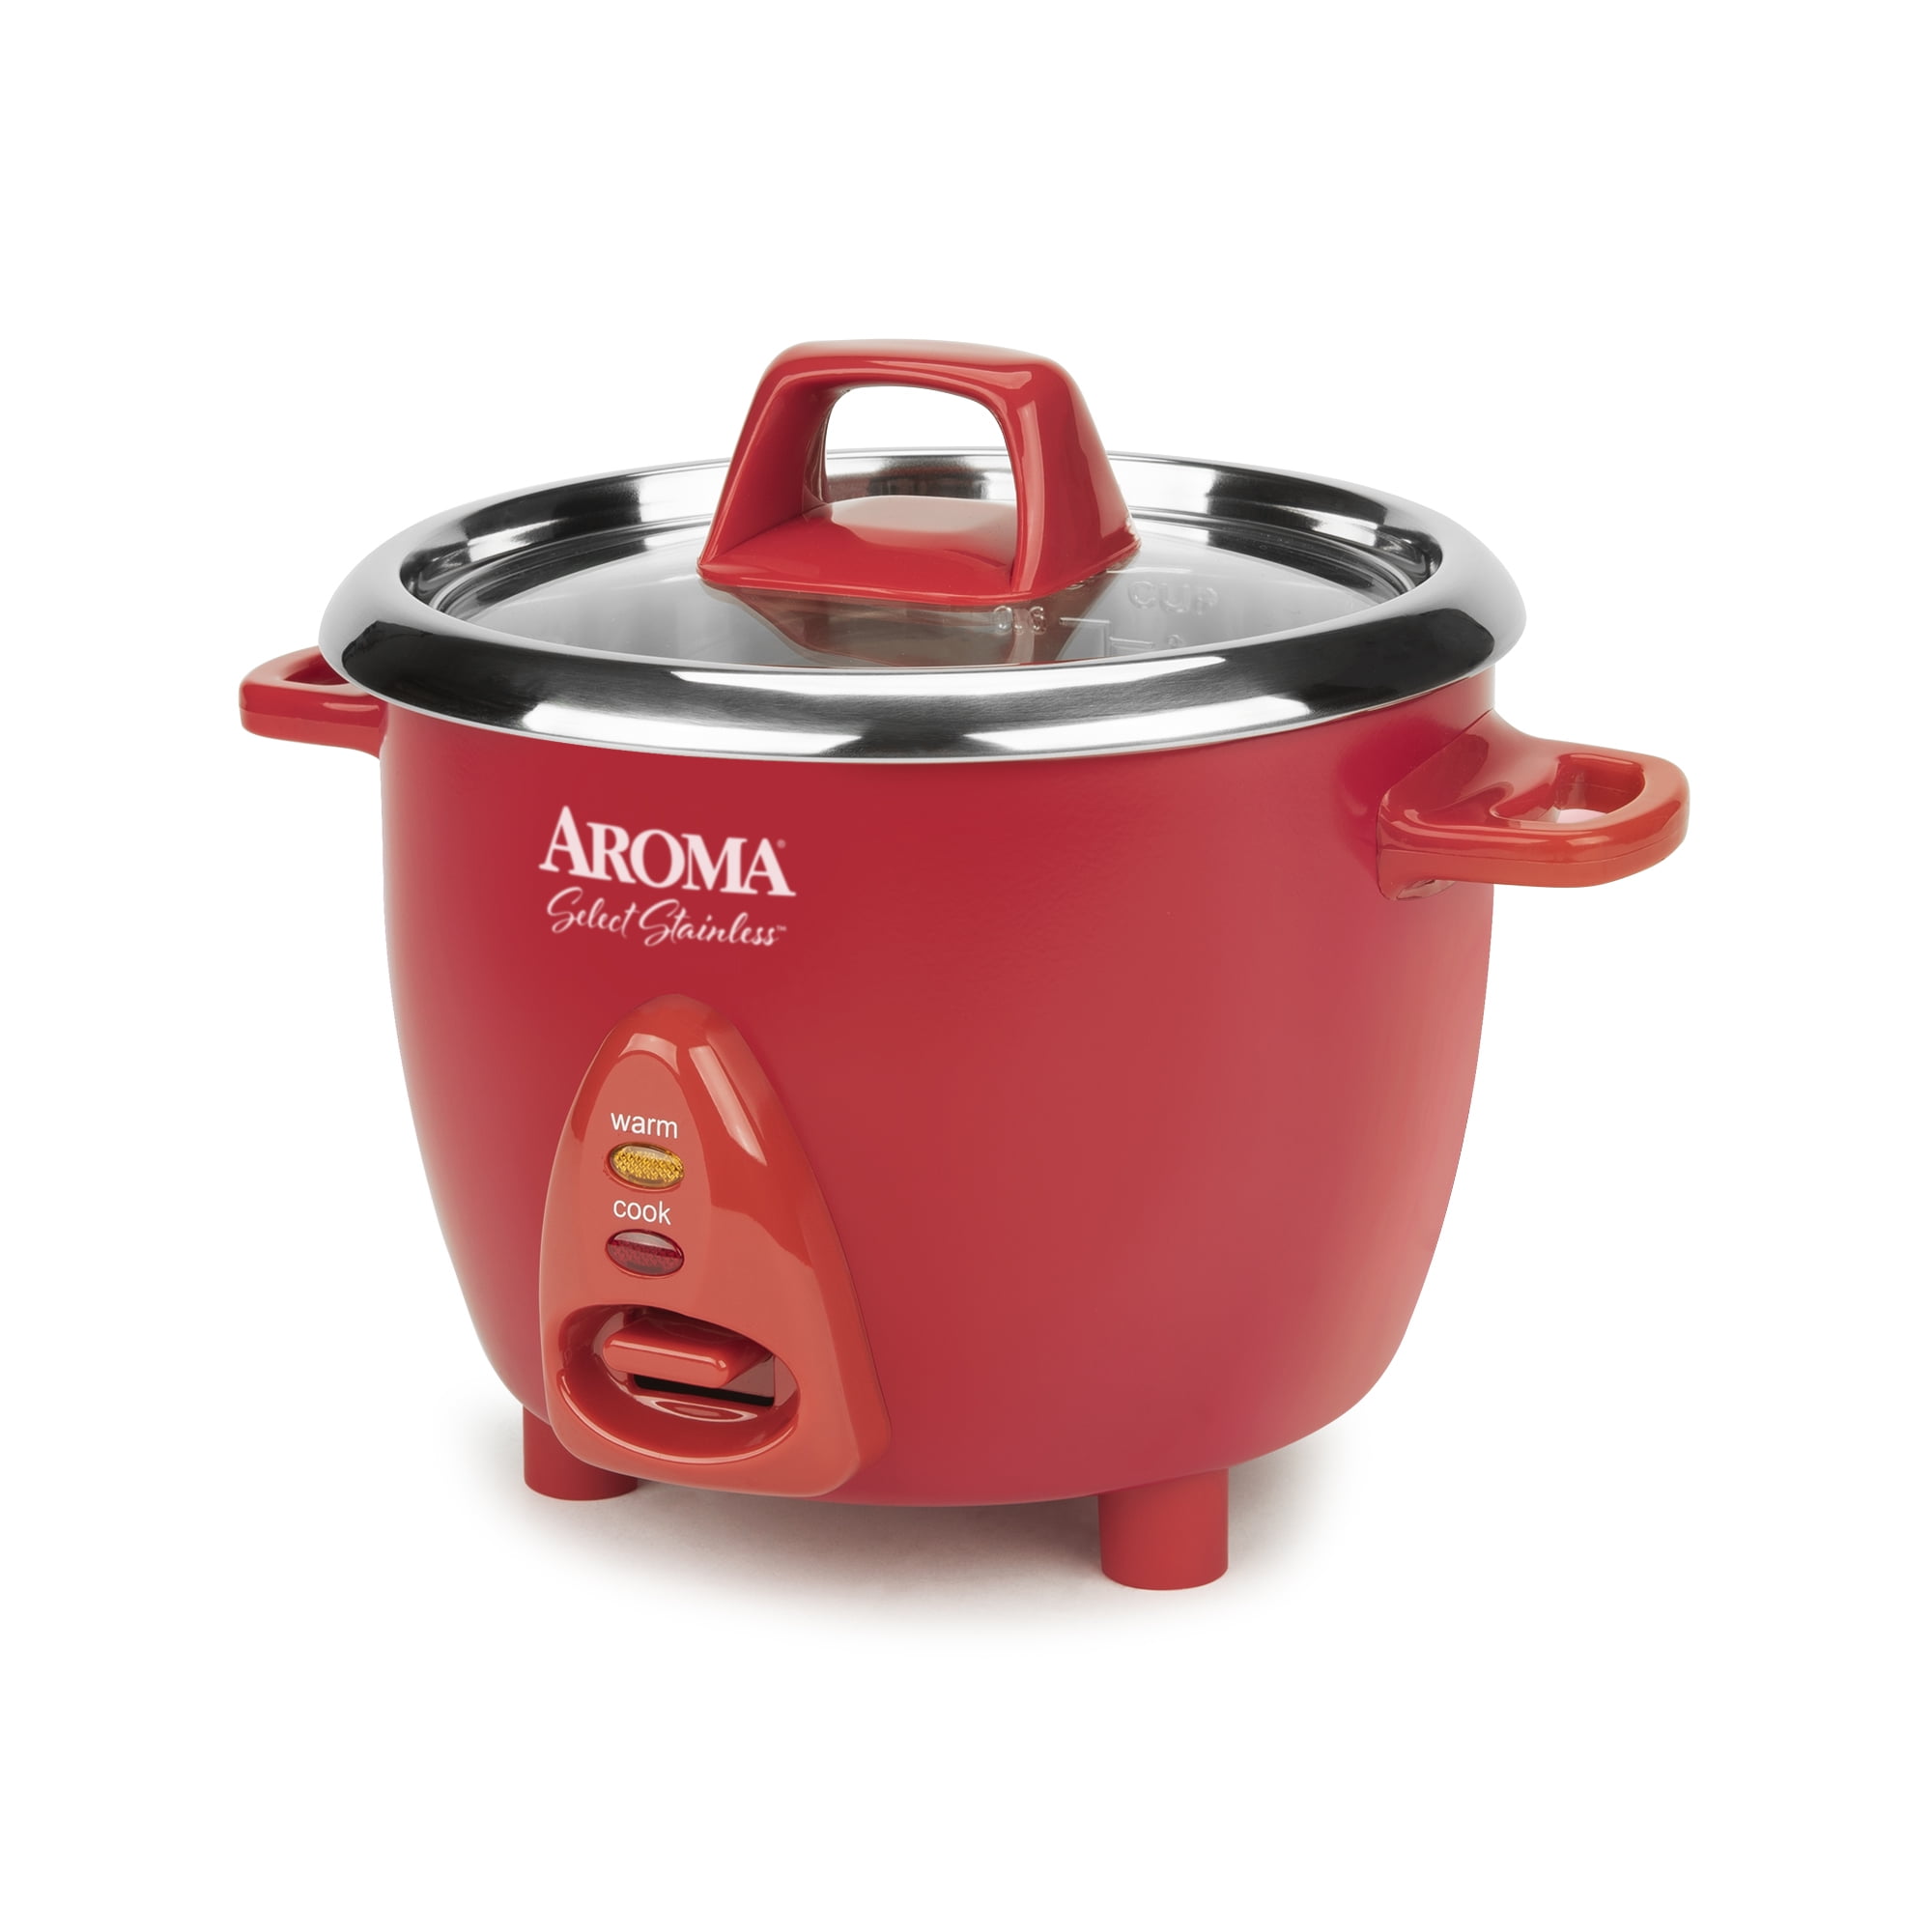 Aroma Stainless Steel Rice Cooker